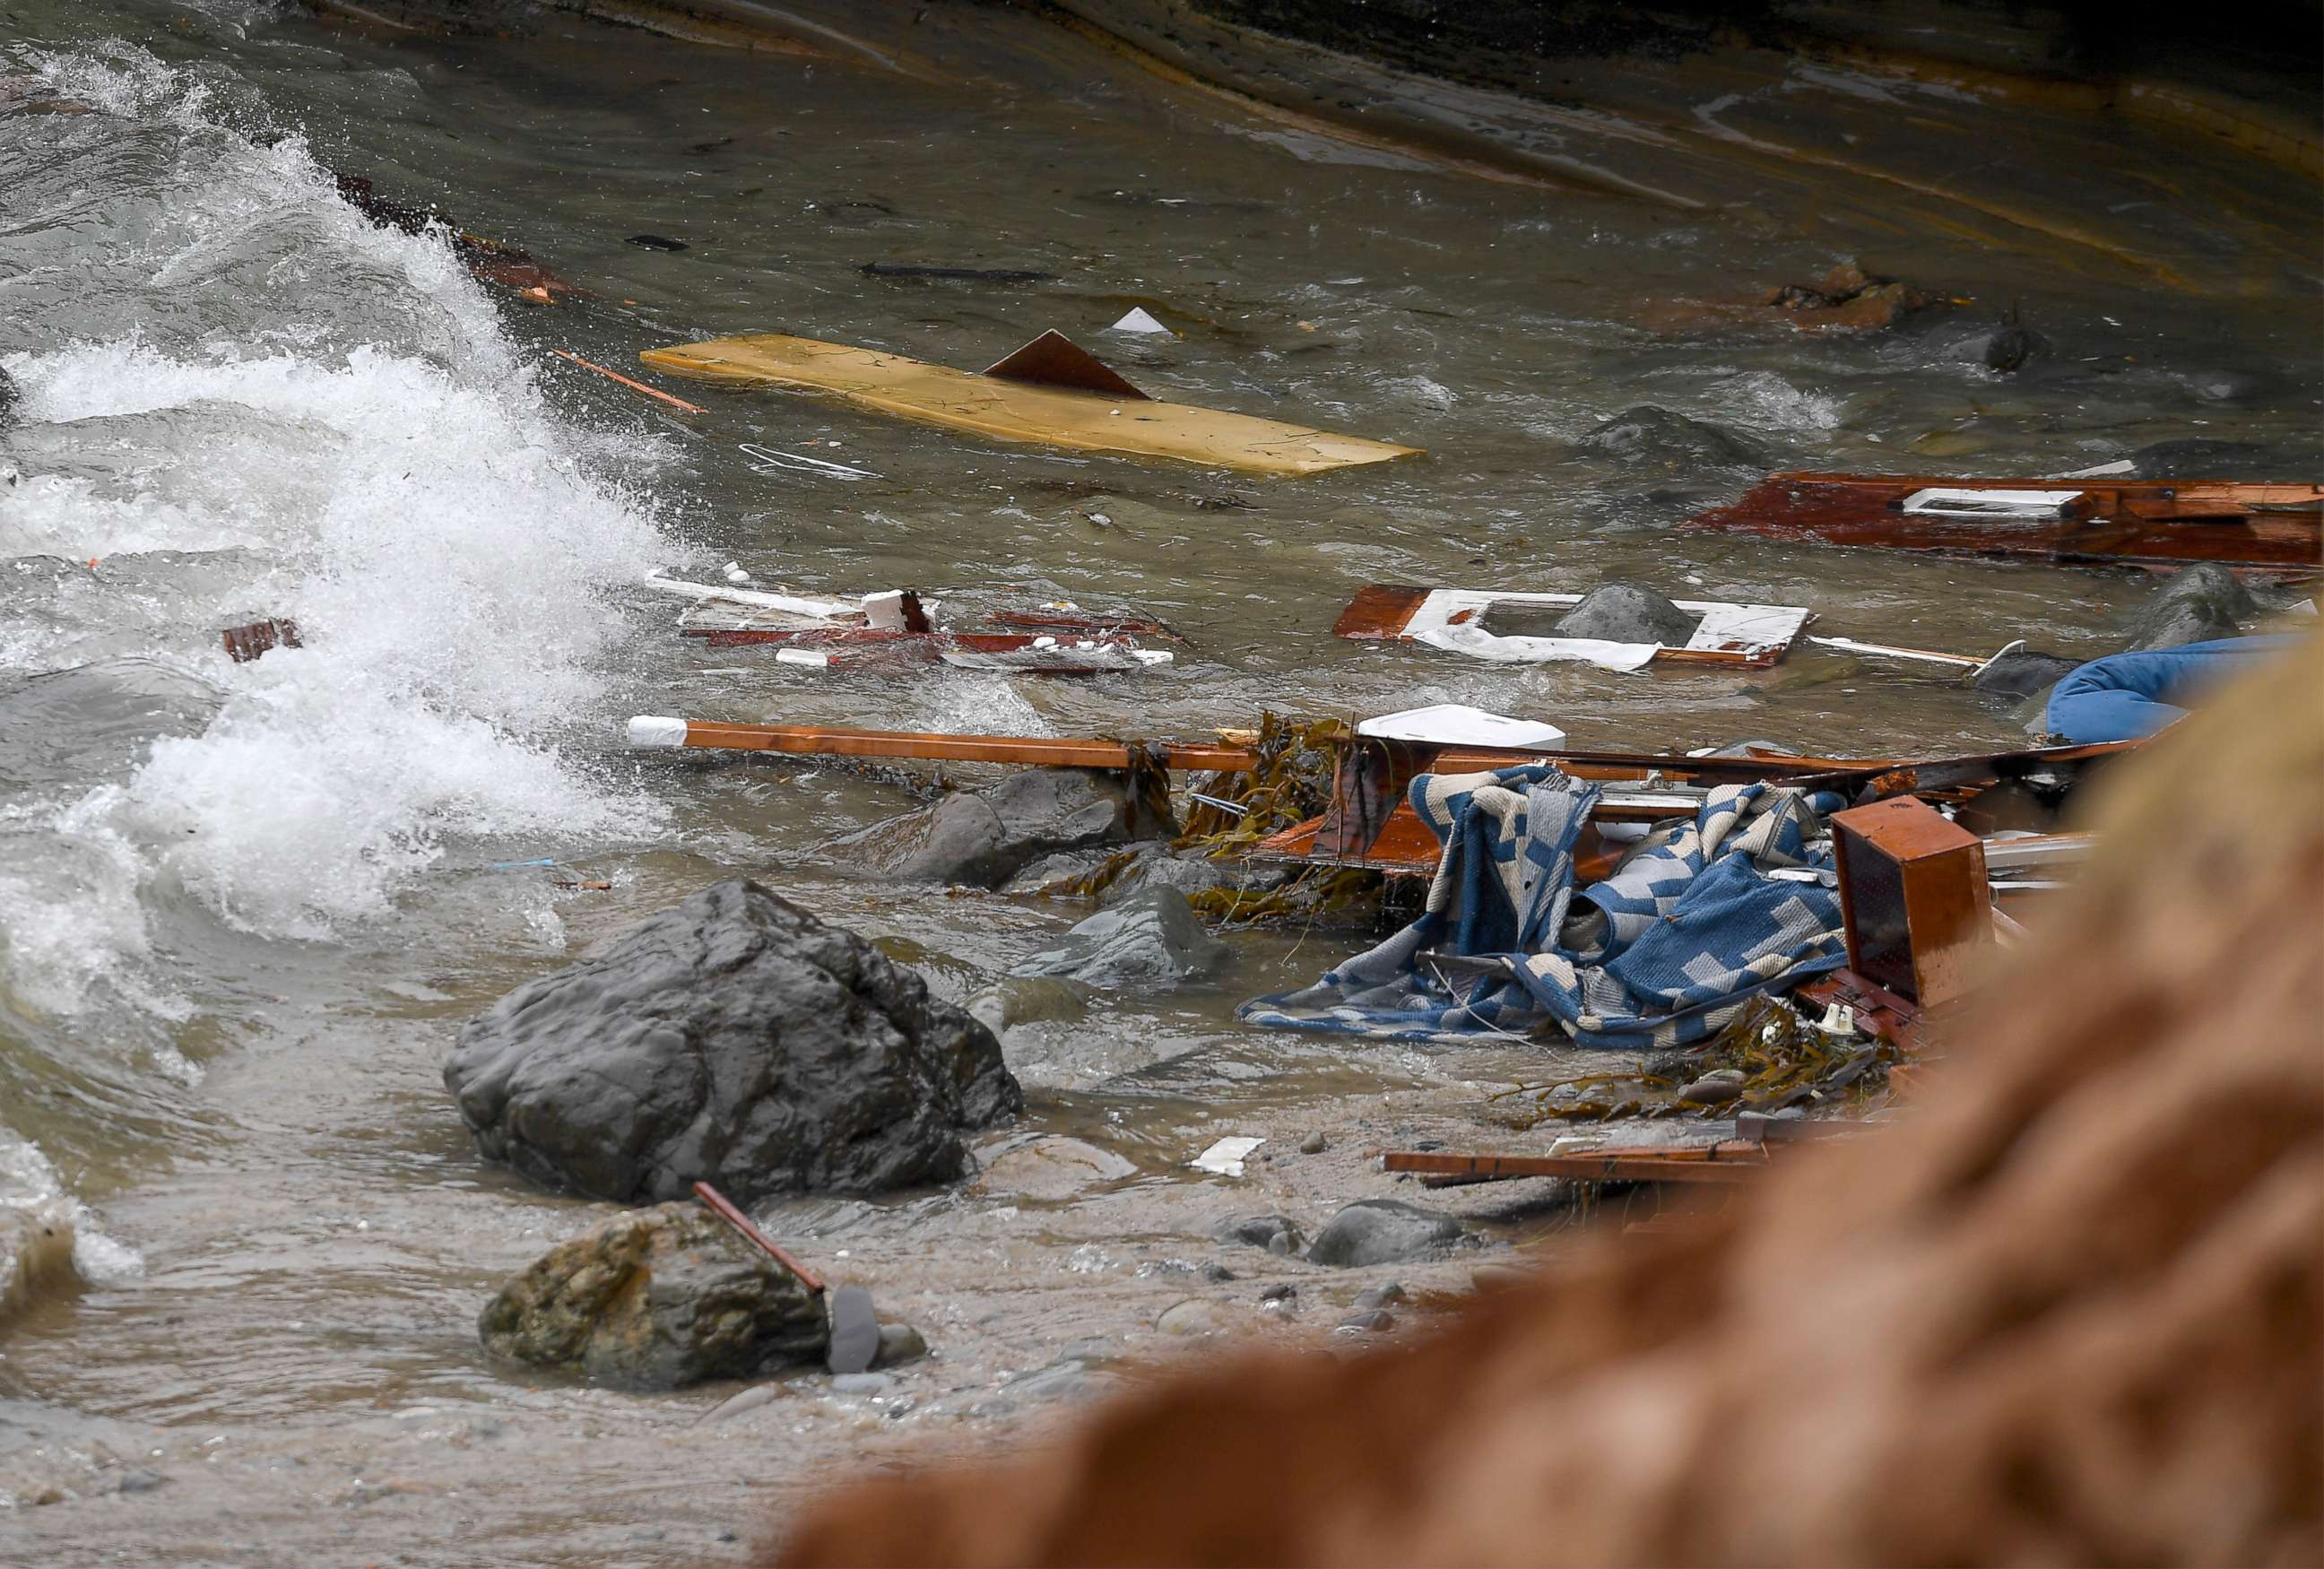 PHOTO: Wreckage and debris from a capsized boat washes ashore at Cabrillo National Monument near where a boat capsized just off the San Diego coast, May 2, 2021, in San Diego.